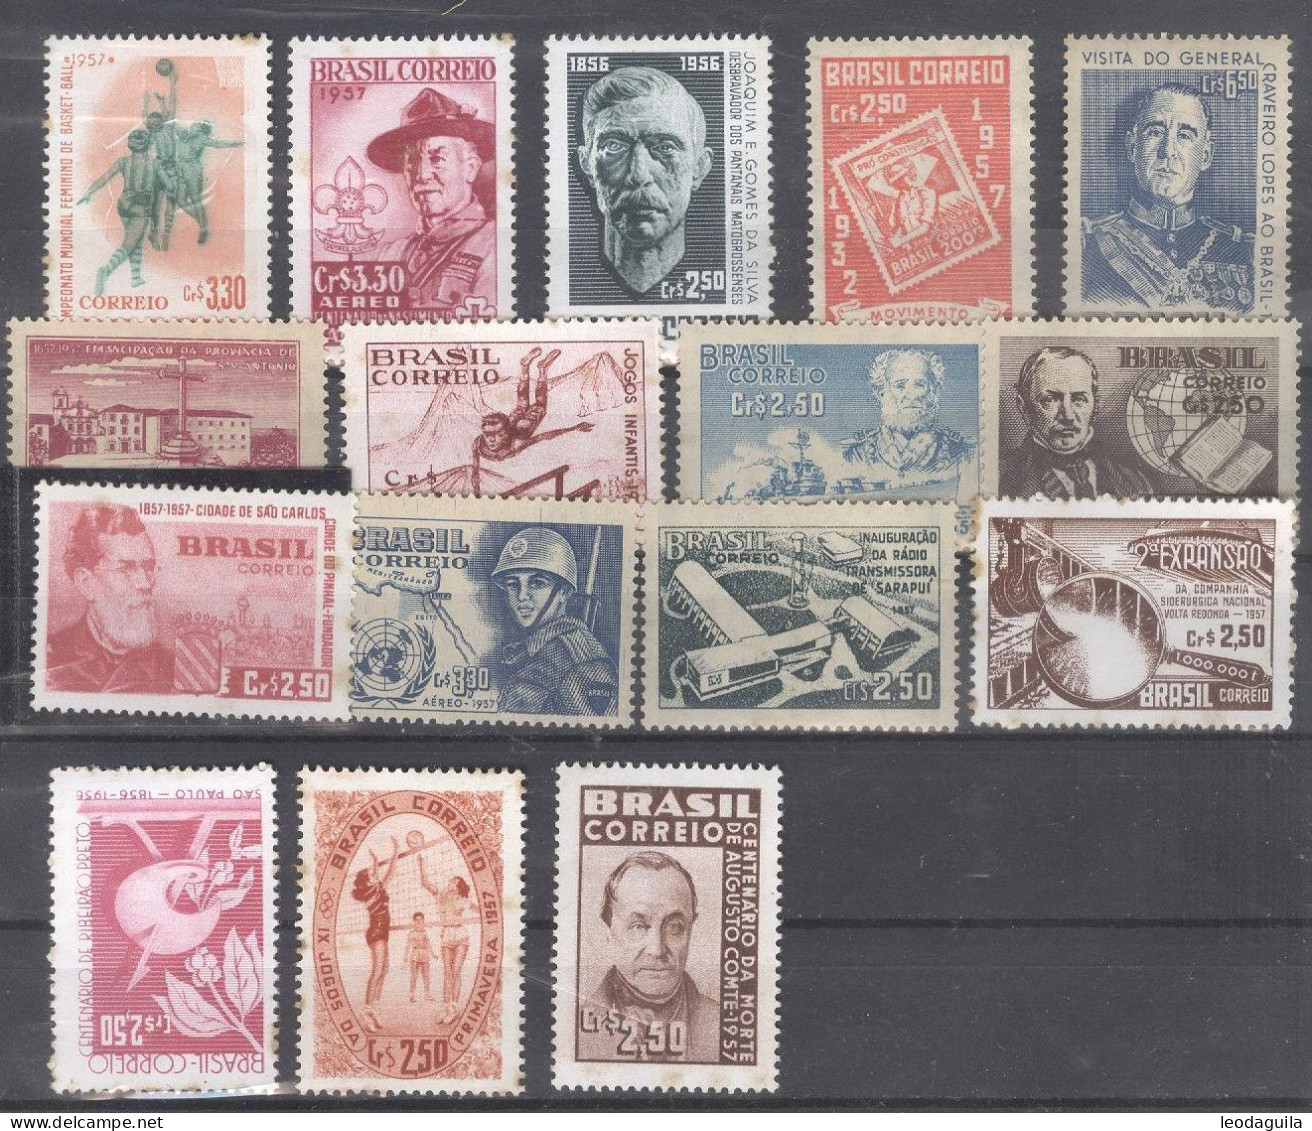 BRAZIL 1957   FULL YEAR COLLECTION  - 16 COMMEMORATIVES STAMPS  MINT - Annate Complete